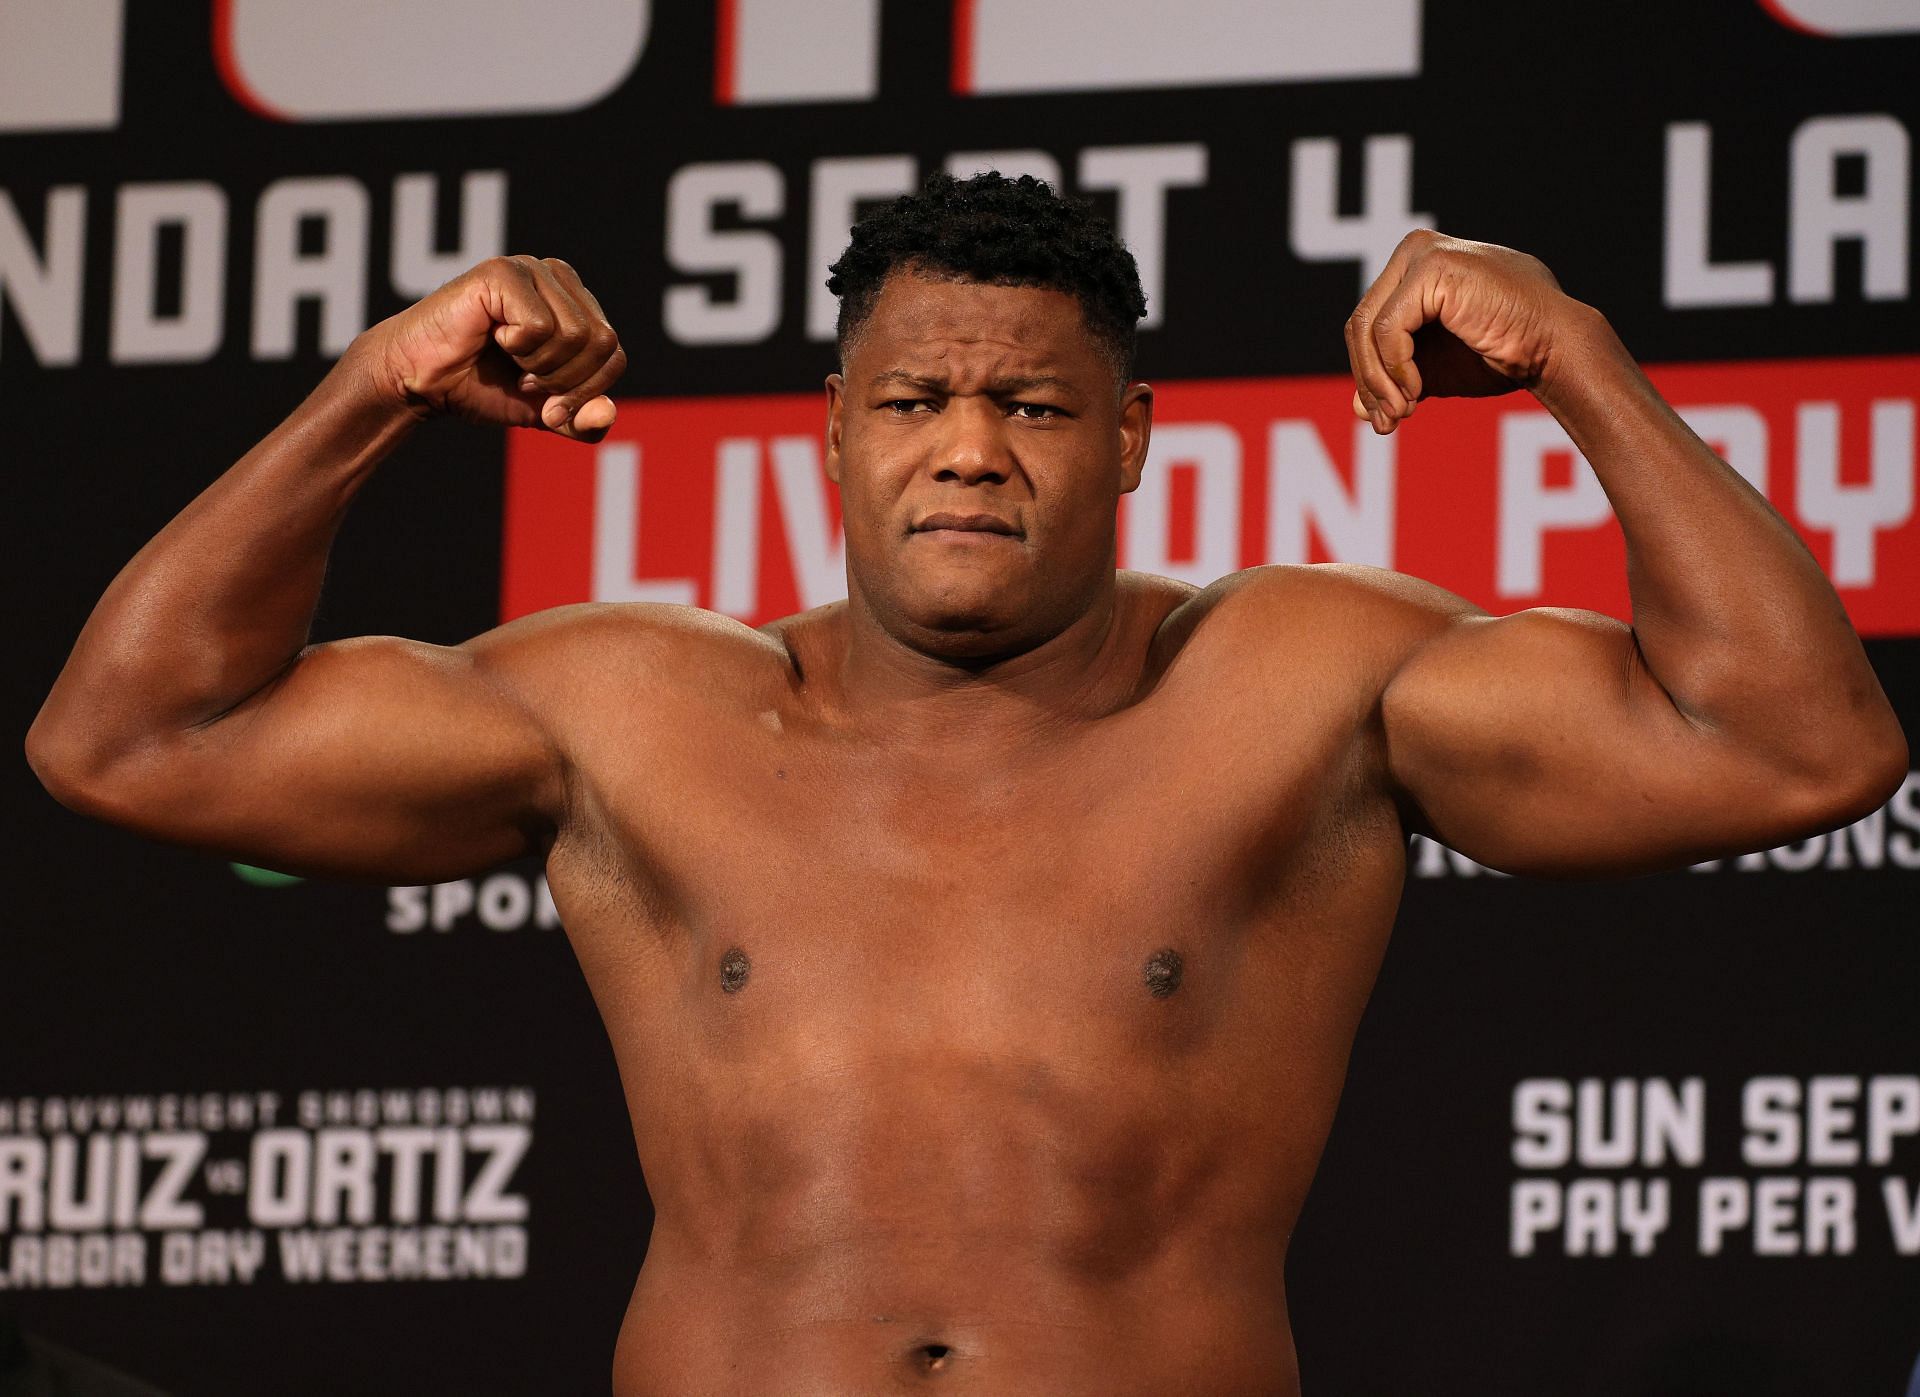 Whats next for Luis Ortiz after Andy Ruiz loss?